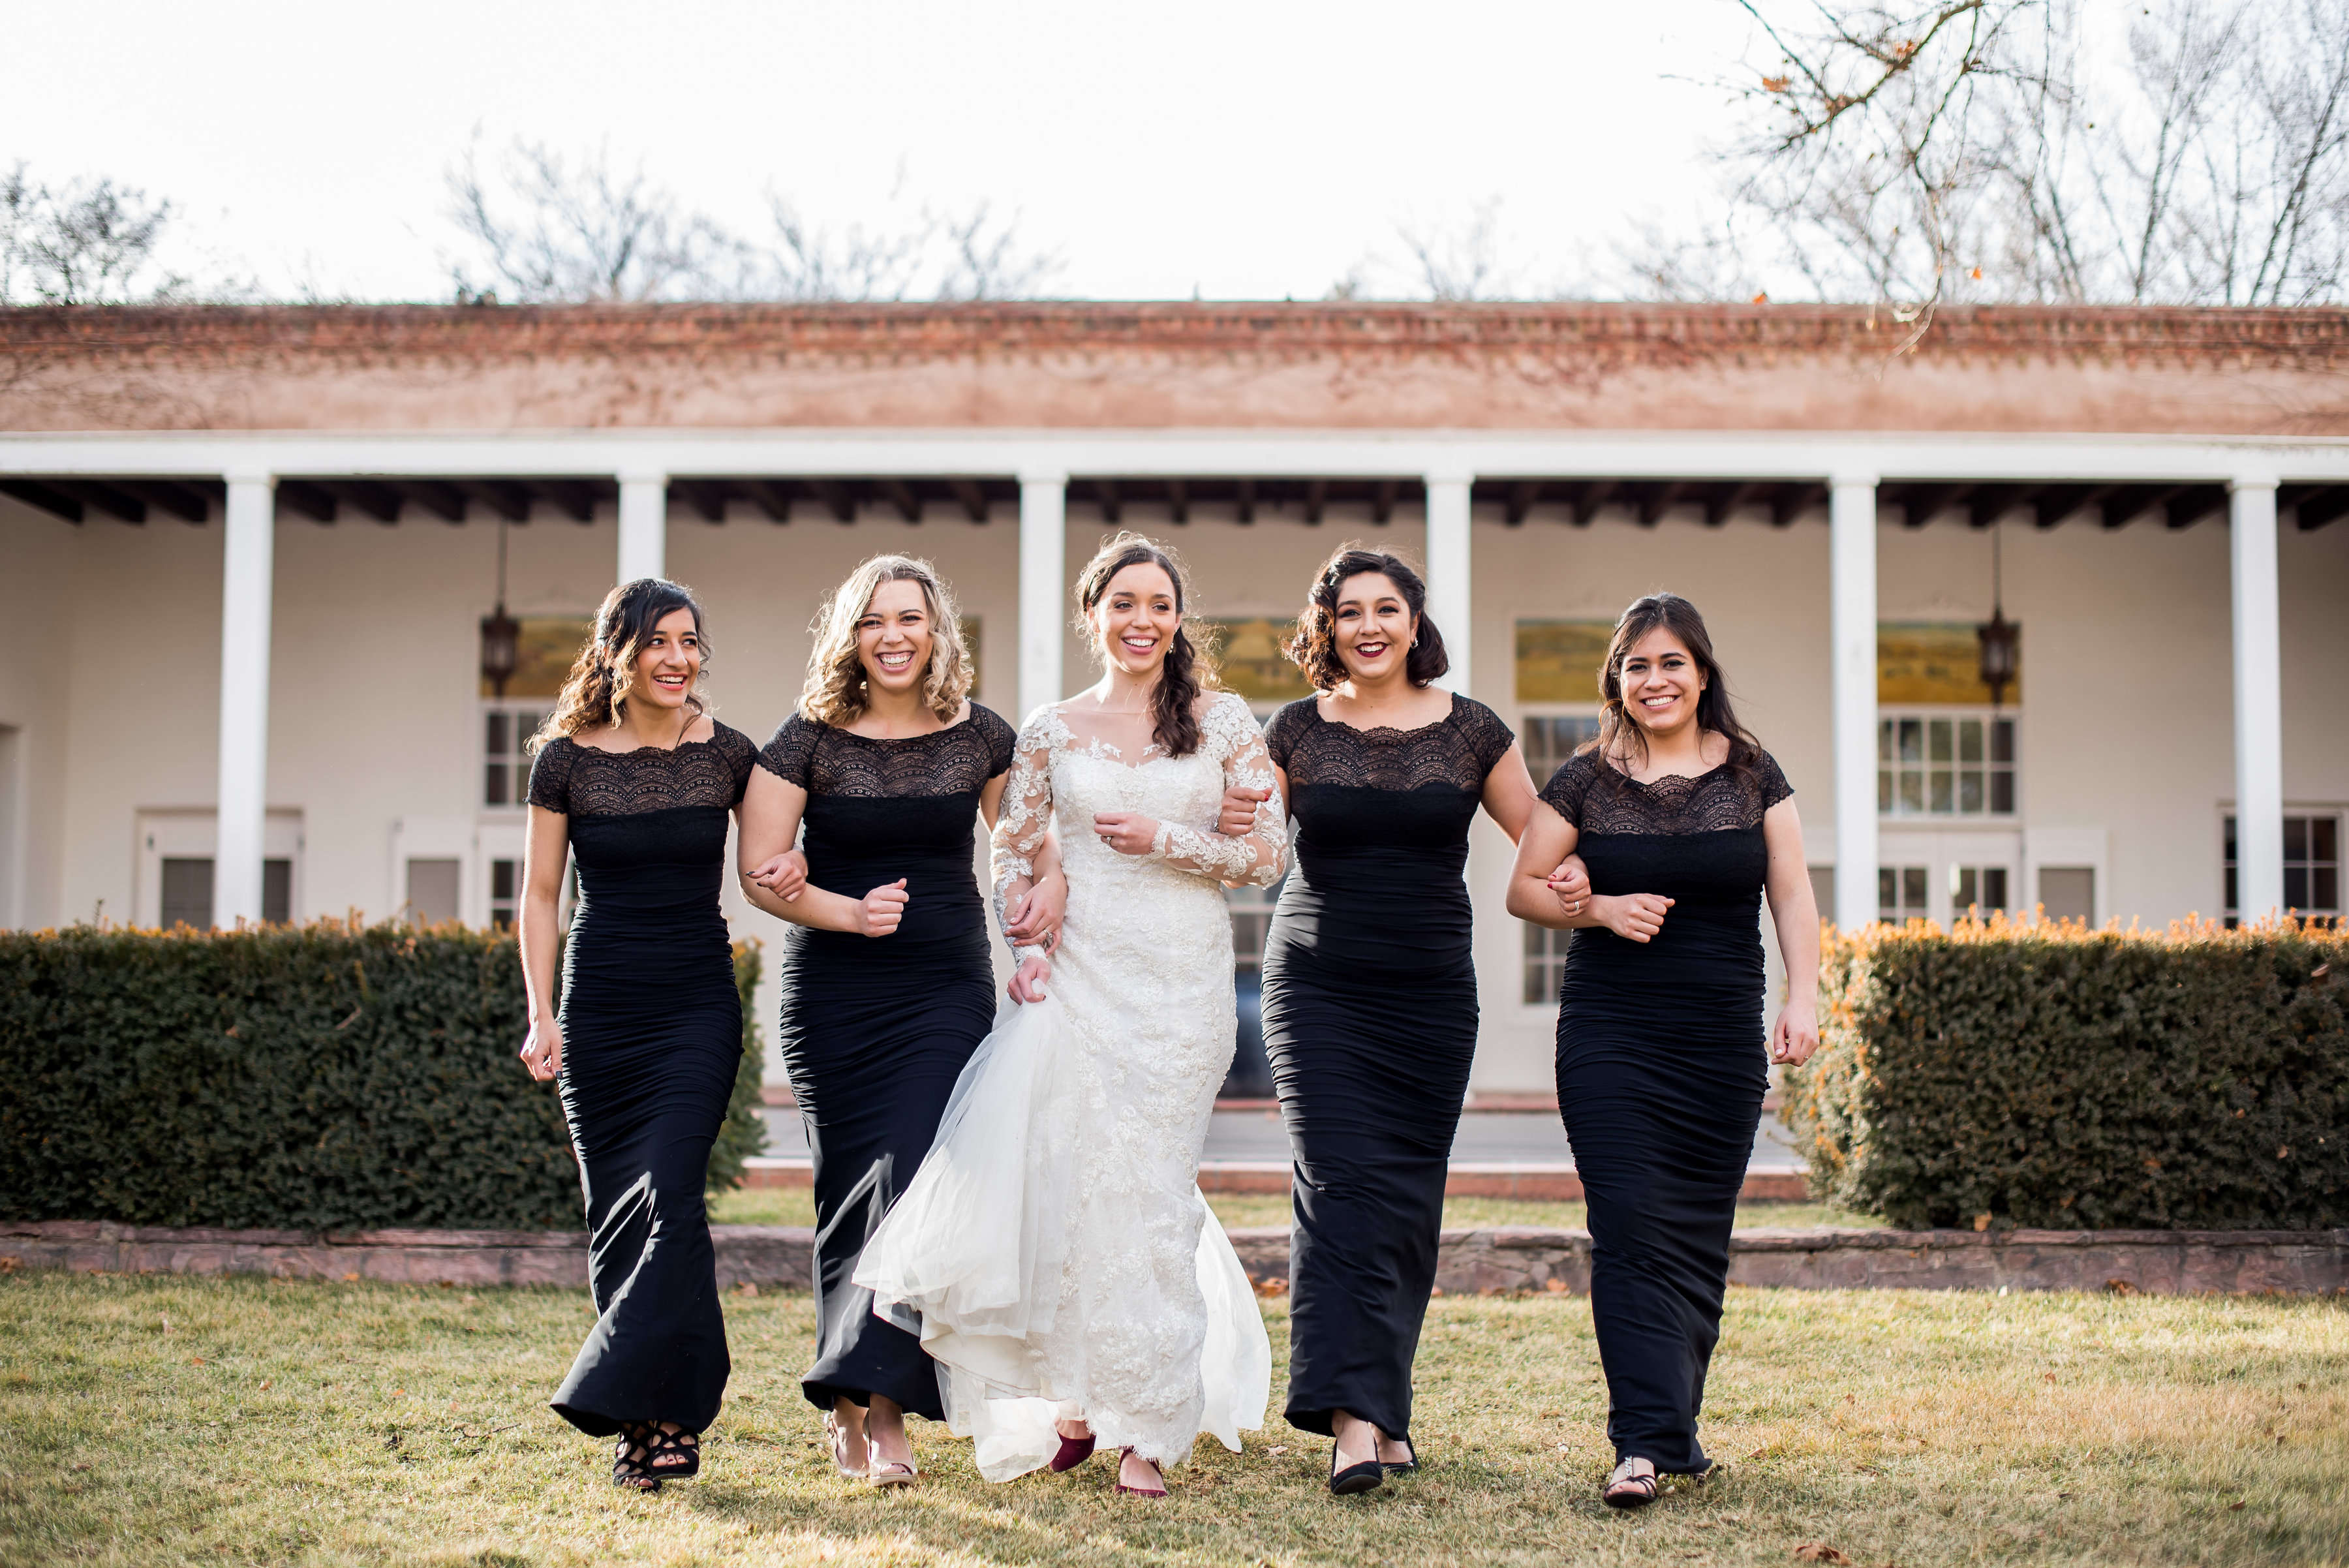 wedding planning design decor inspo real local New Mexico Perfect Wedding Guide lace bridesmaids maid of honor wedding party long sleeve traditional black outdoor natural light